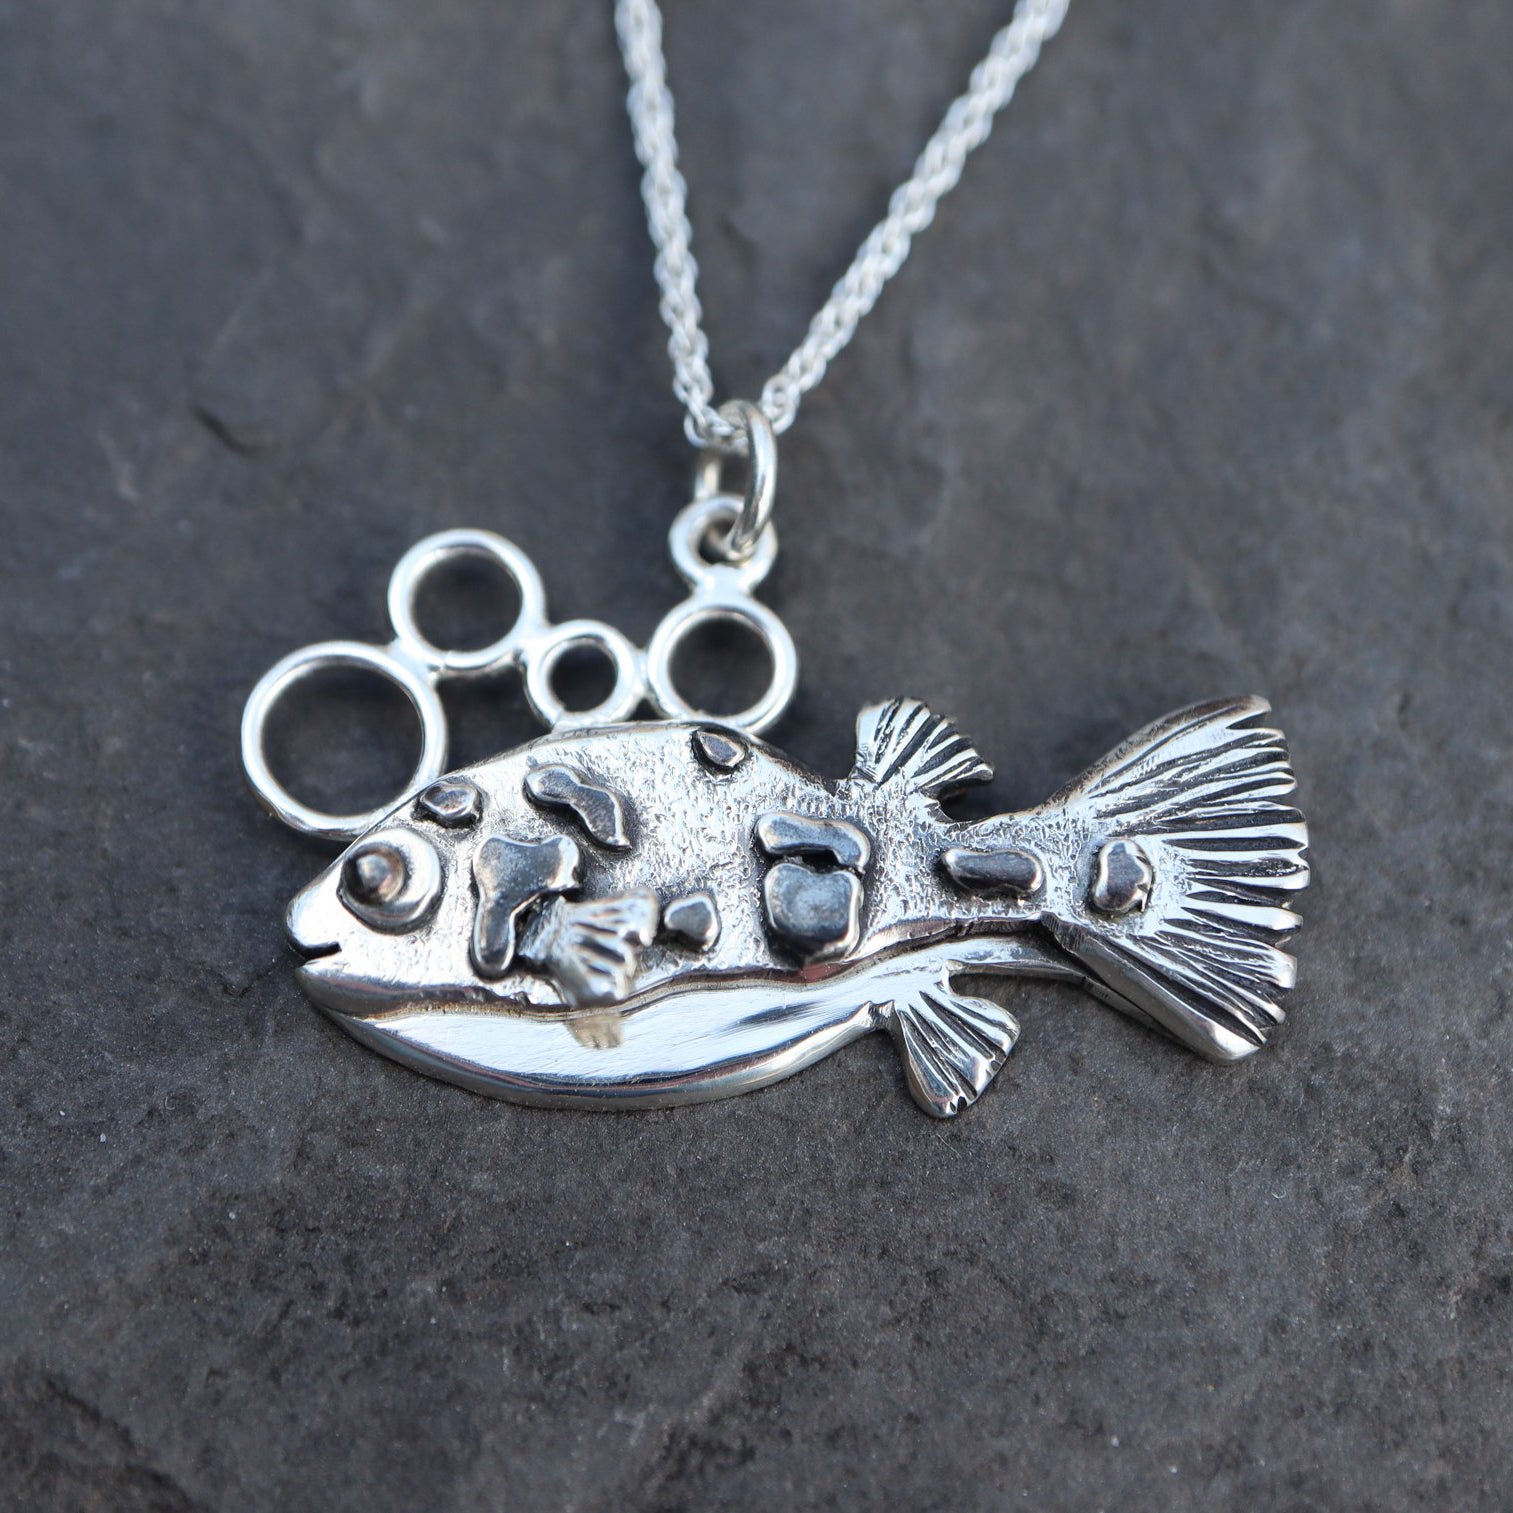 A handmade sterling silver dwarf pea puffer charm necklace is shown on top of a dark slate stone.